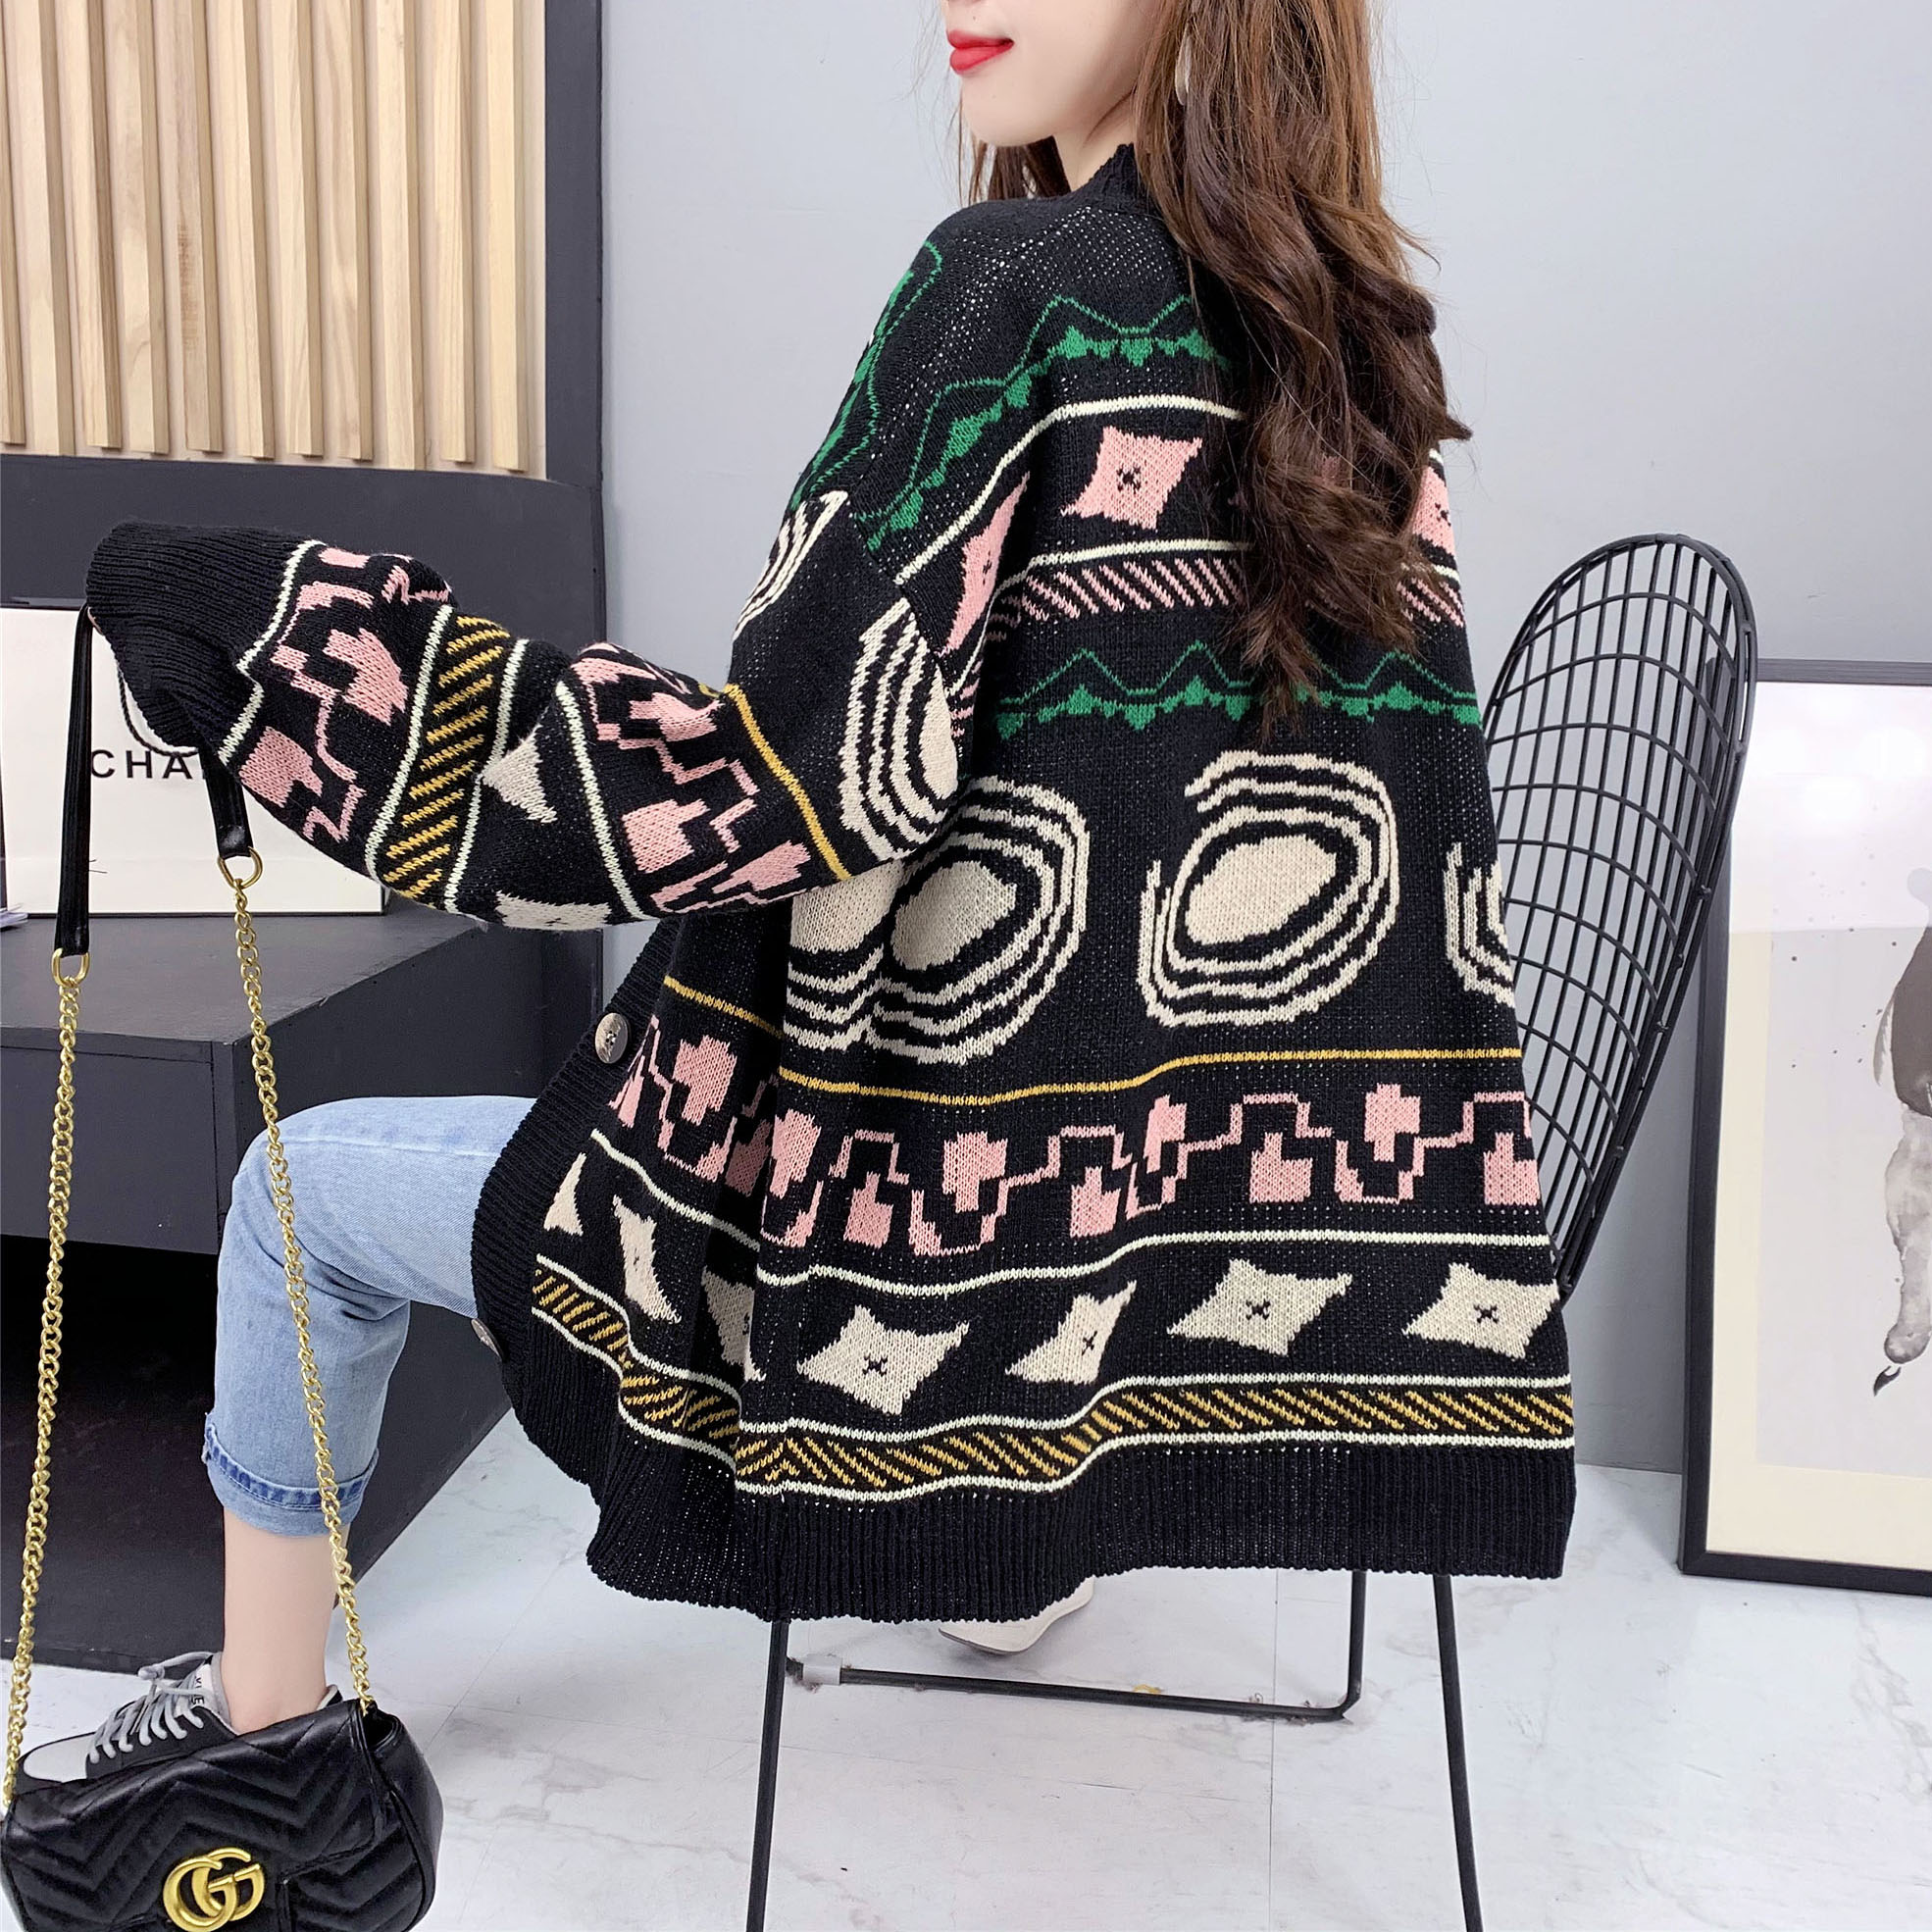 Retro jacquard knitted cardigan women's spring new style lazy sweater jacket spring and autumn loose outer wear trend